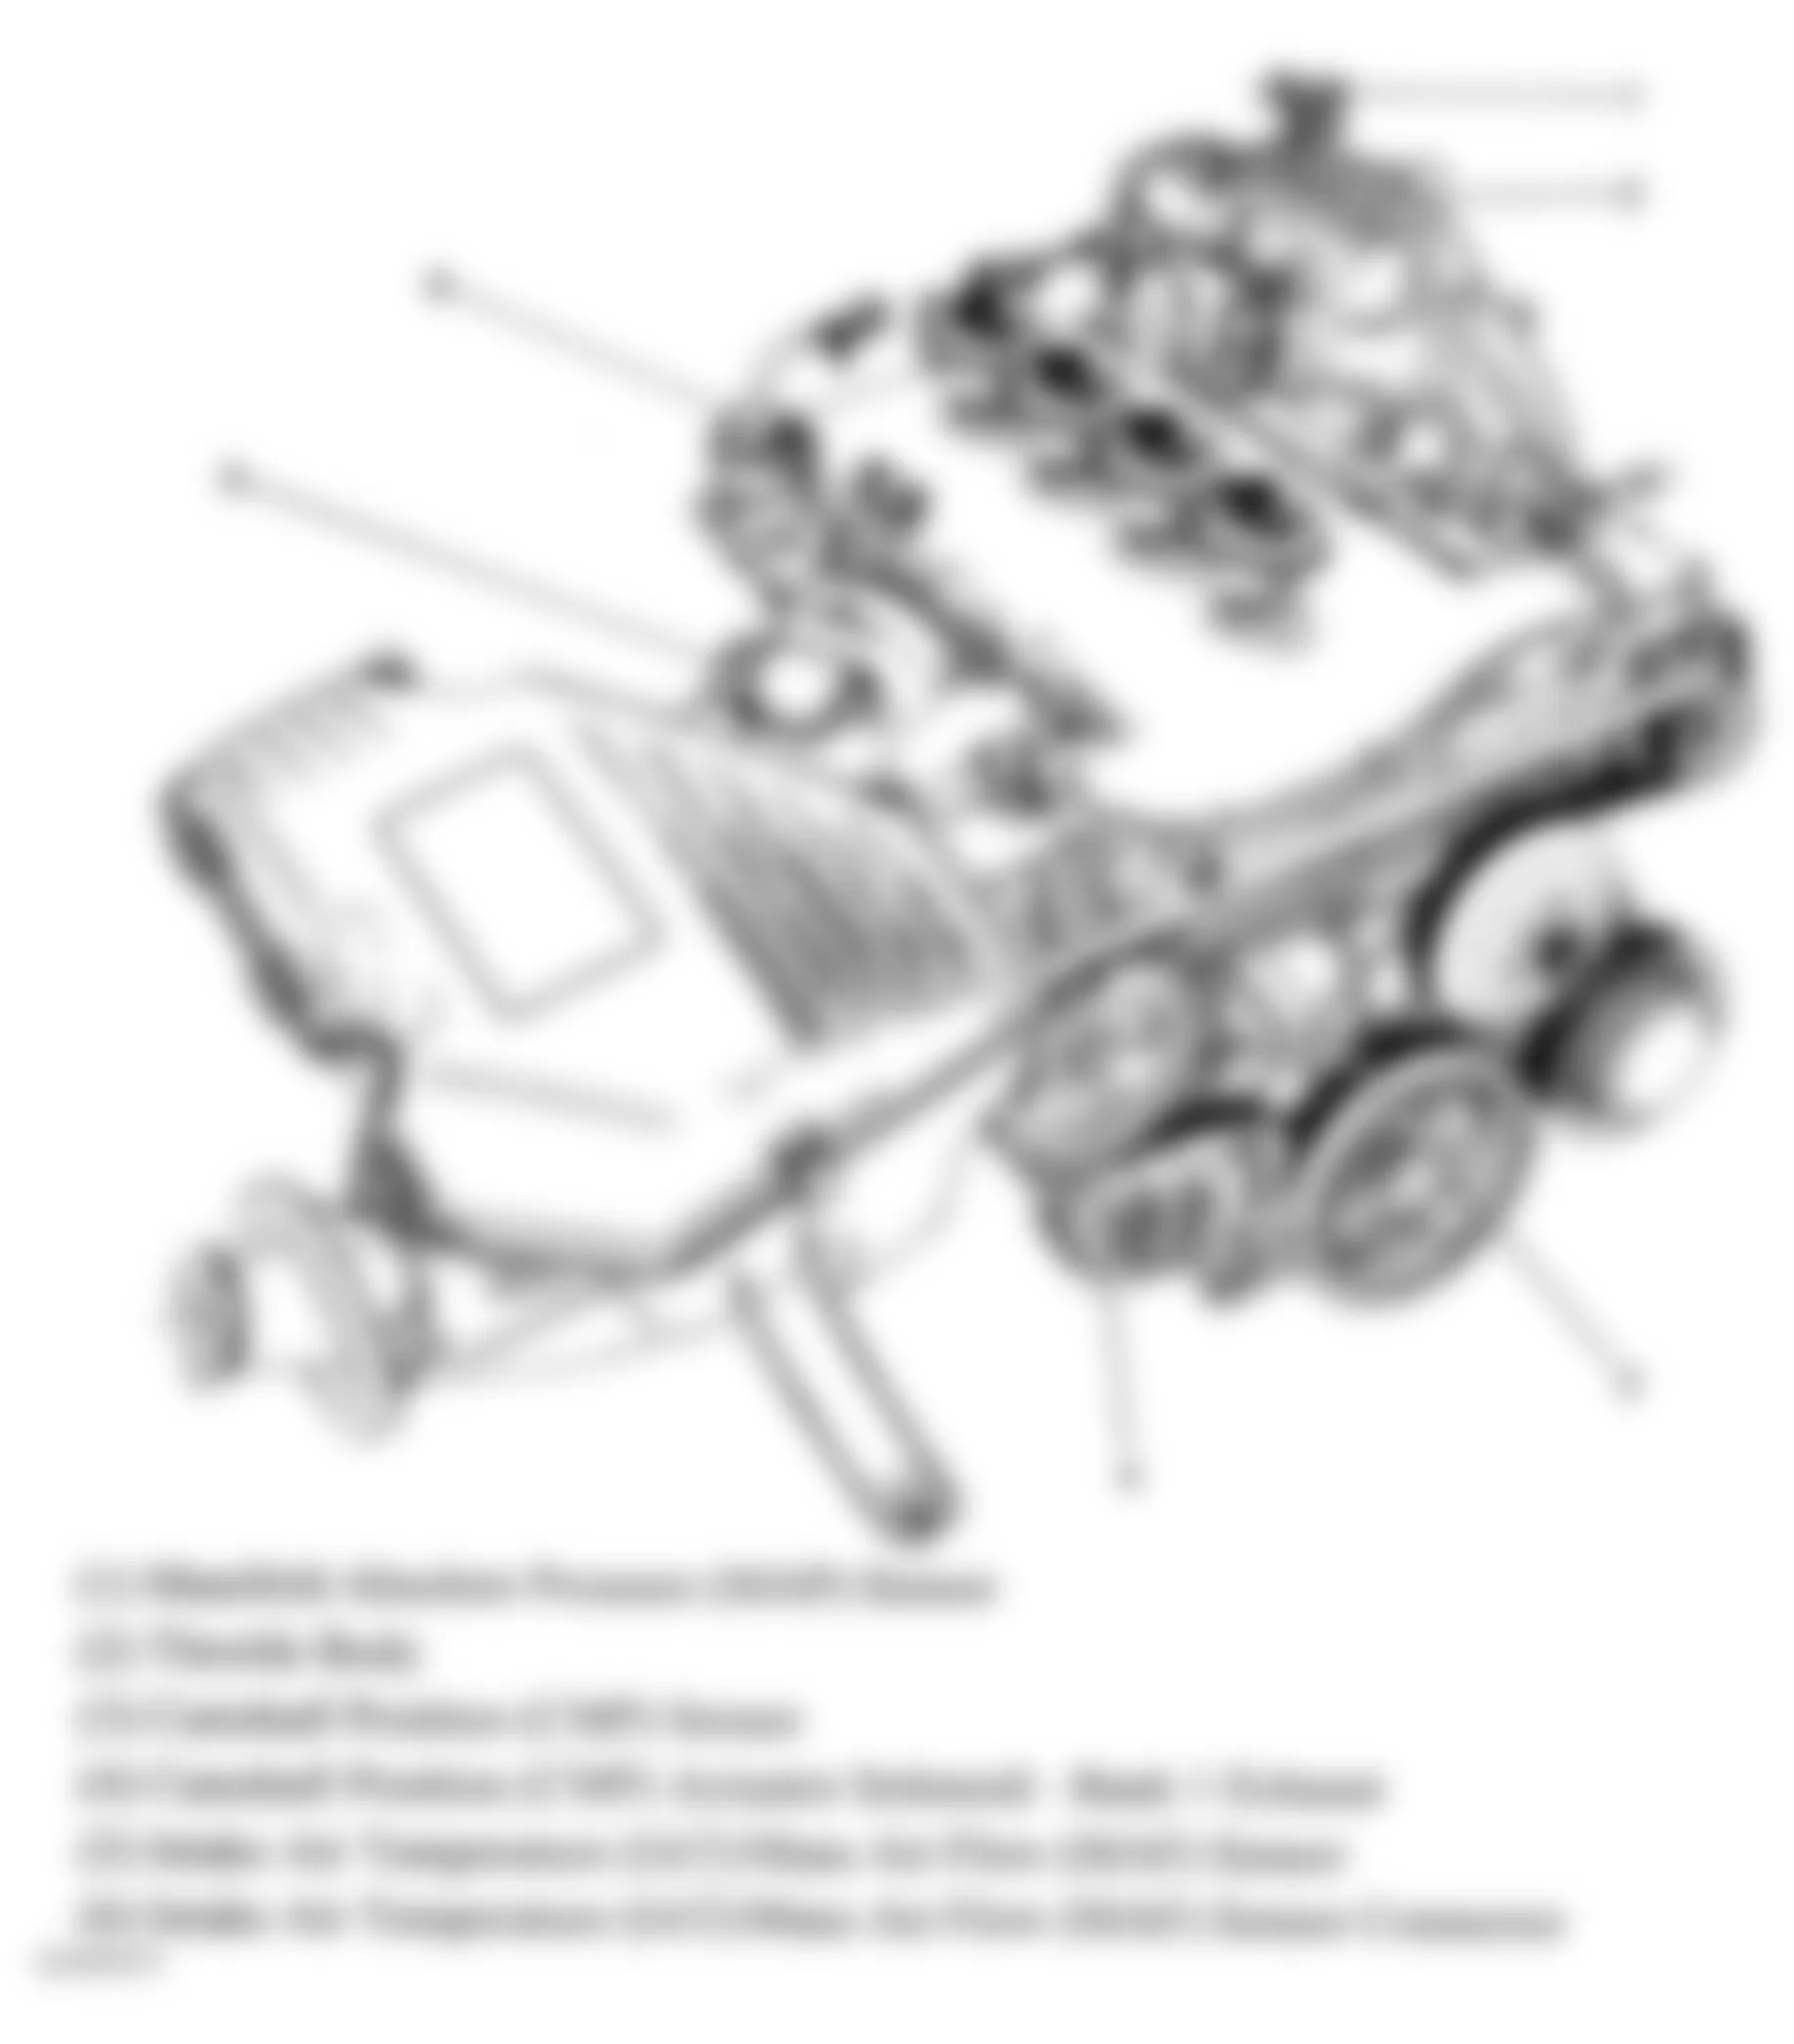 Isuzu i-290 LS 2007 - Component Locations -  Top/Front View Of Engine (2.9L)